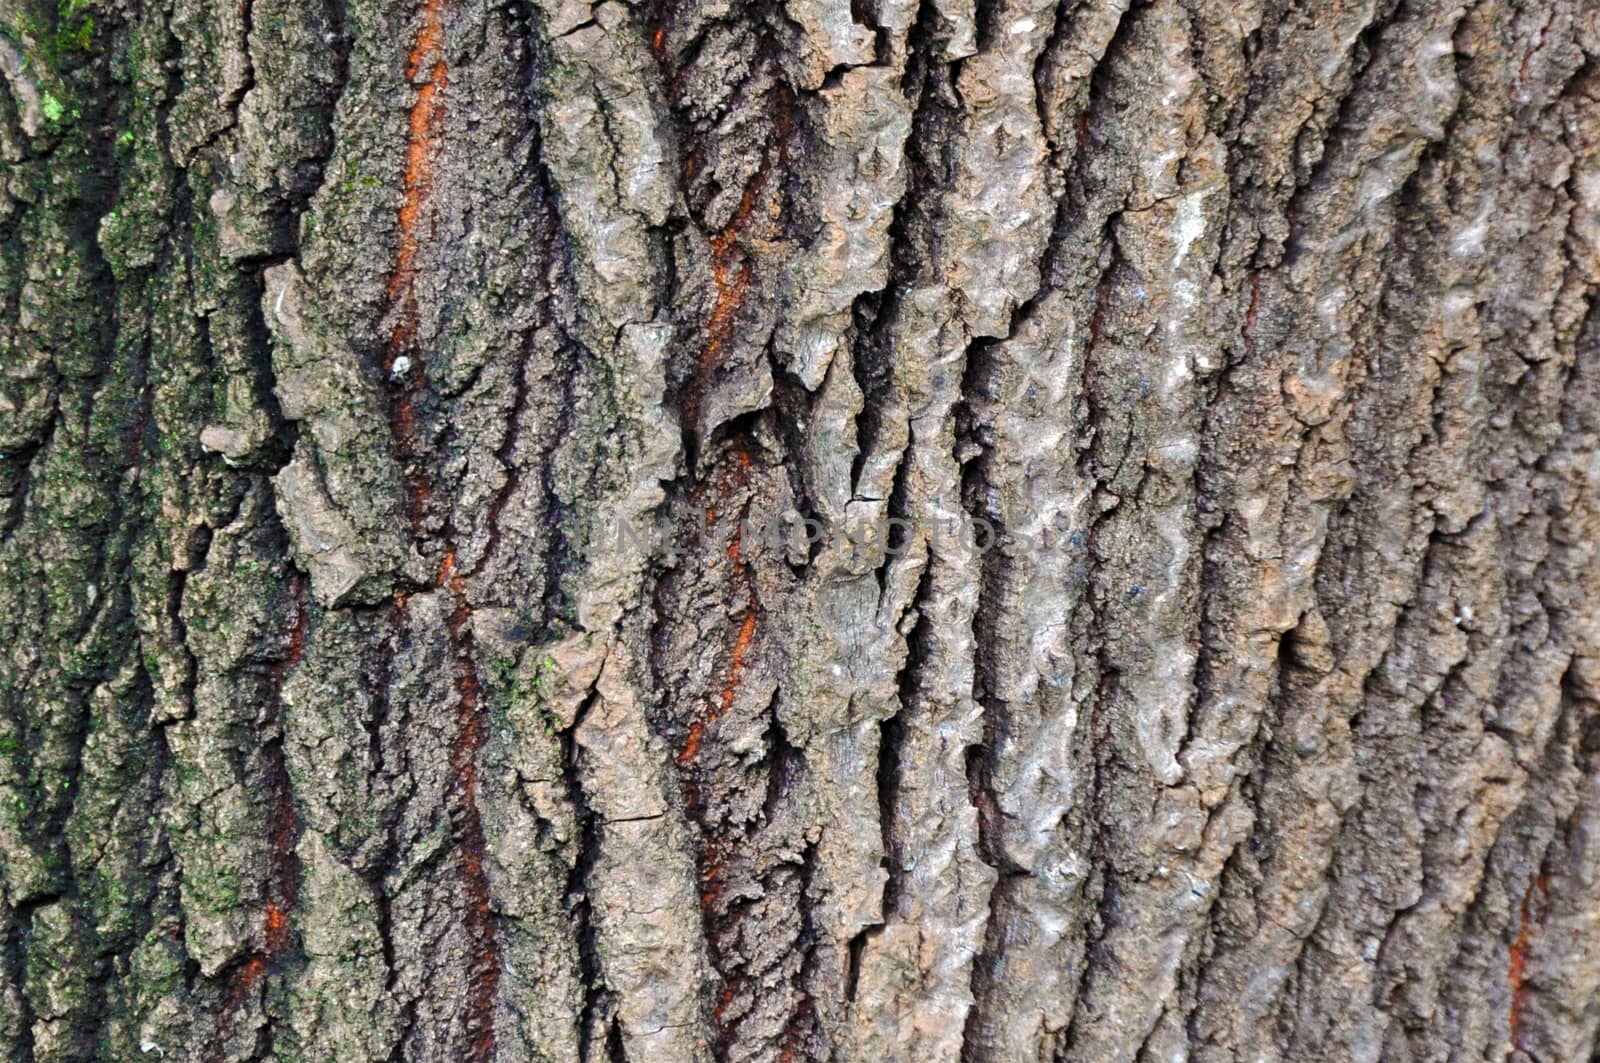 rough texture of bark and old wood